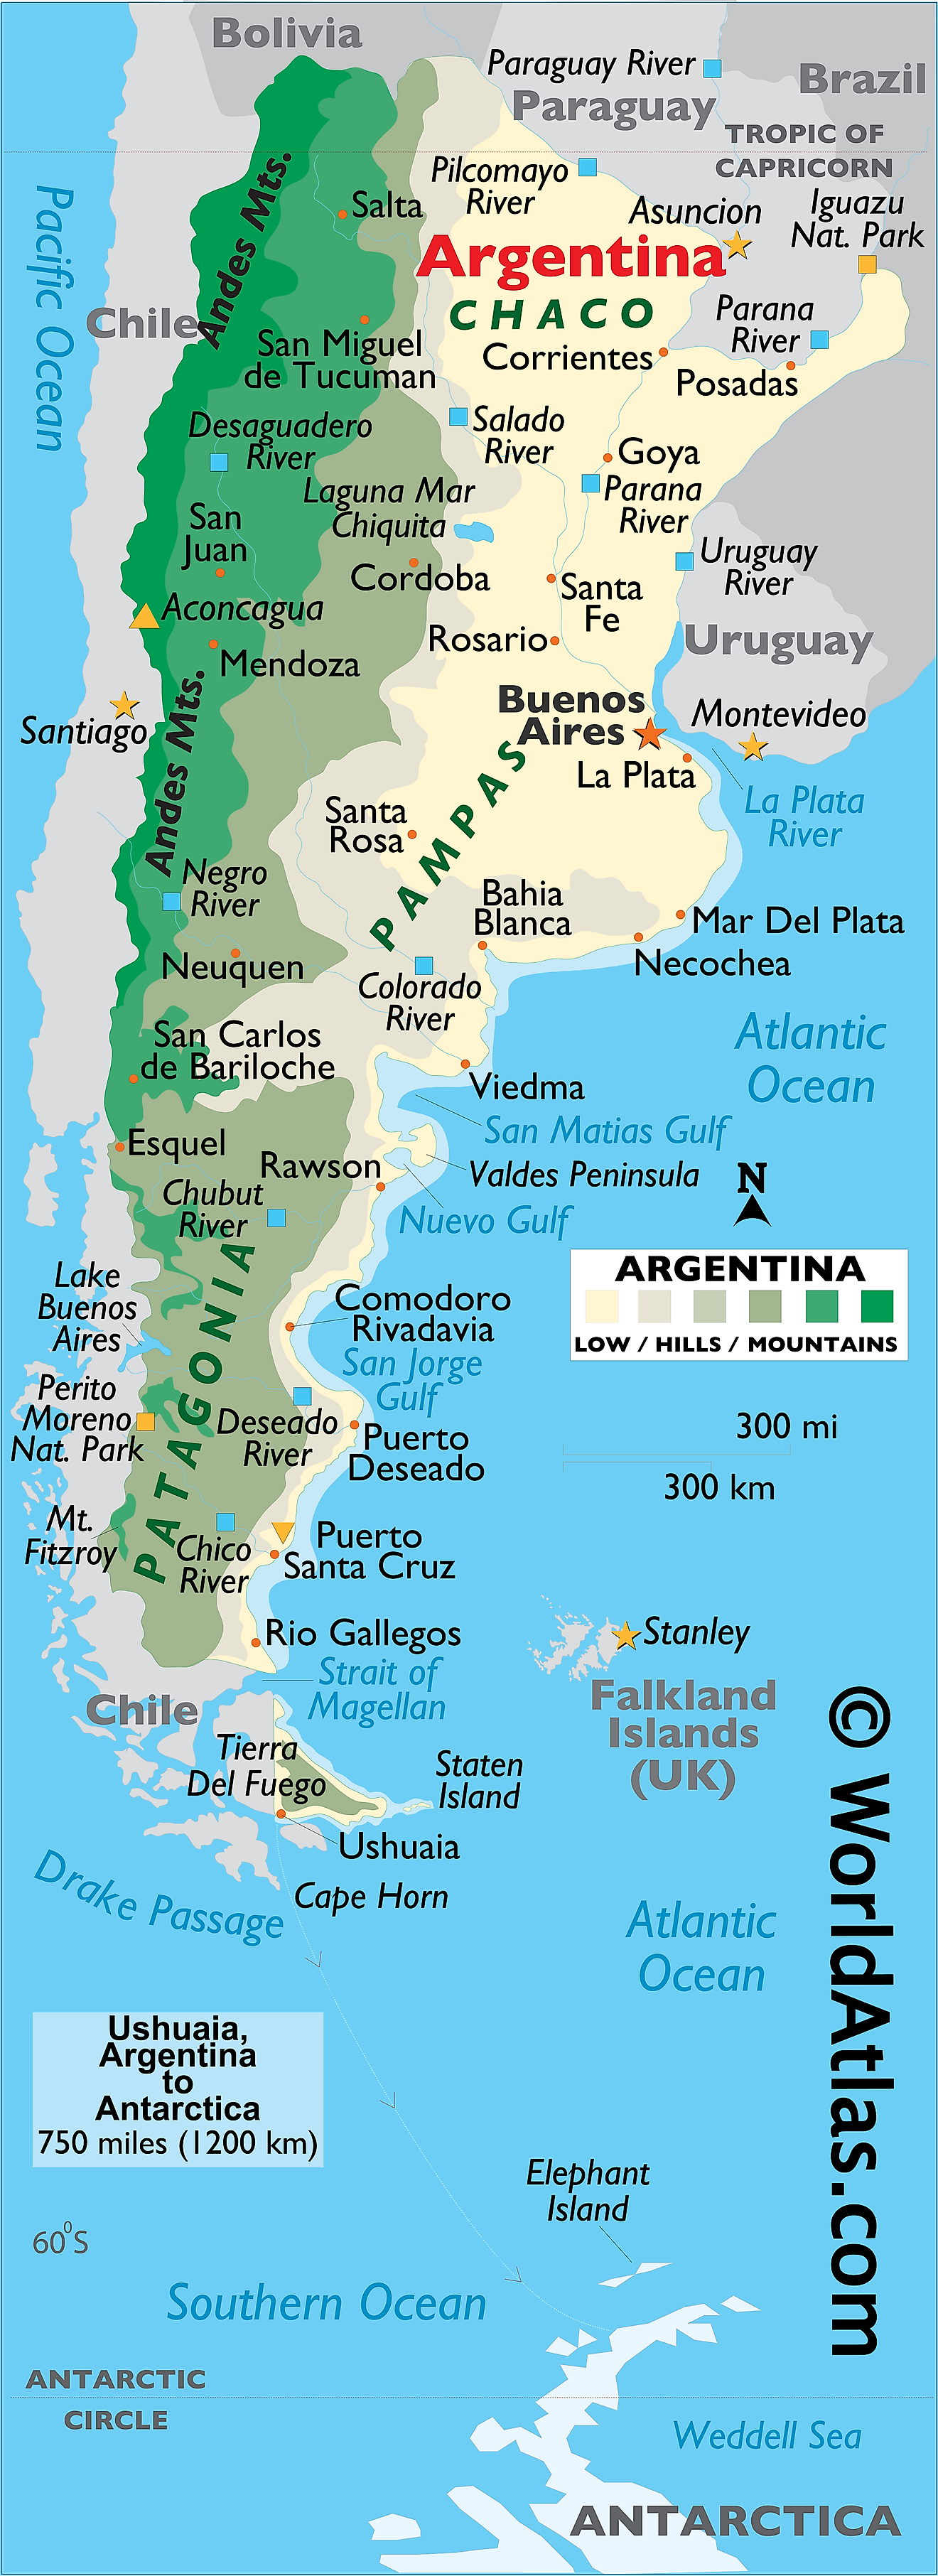 Physical Map of Argentina showing relief, Patagonia and Pampas regions, rivers, mountains ranges, Cape Horn, major lakes, important cities, and more.